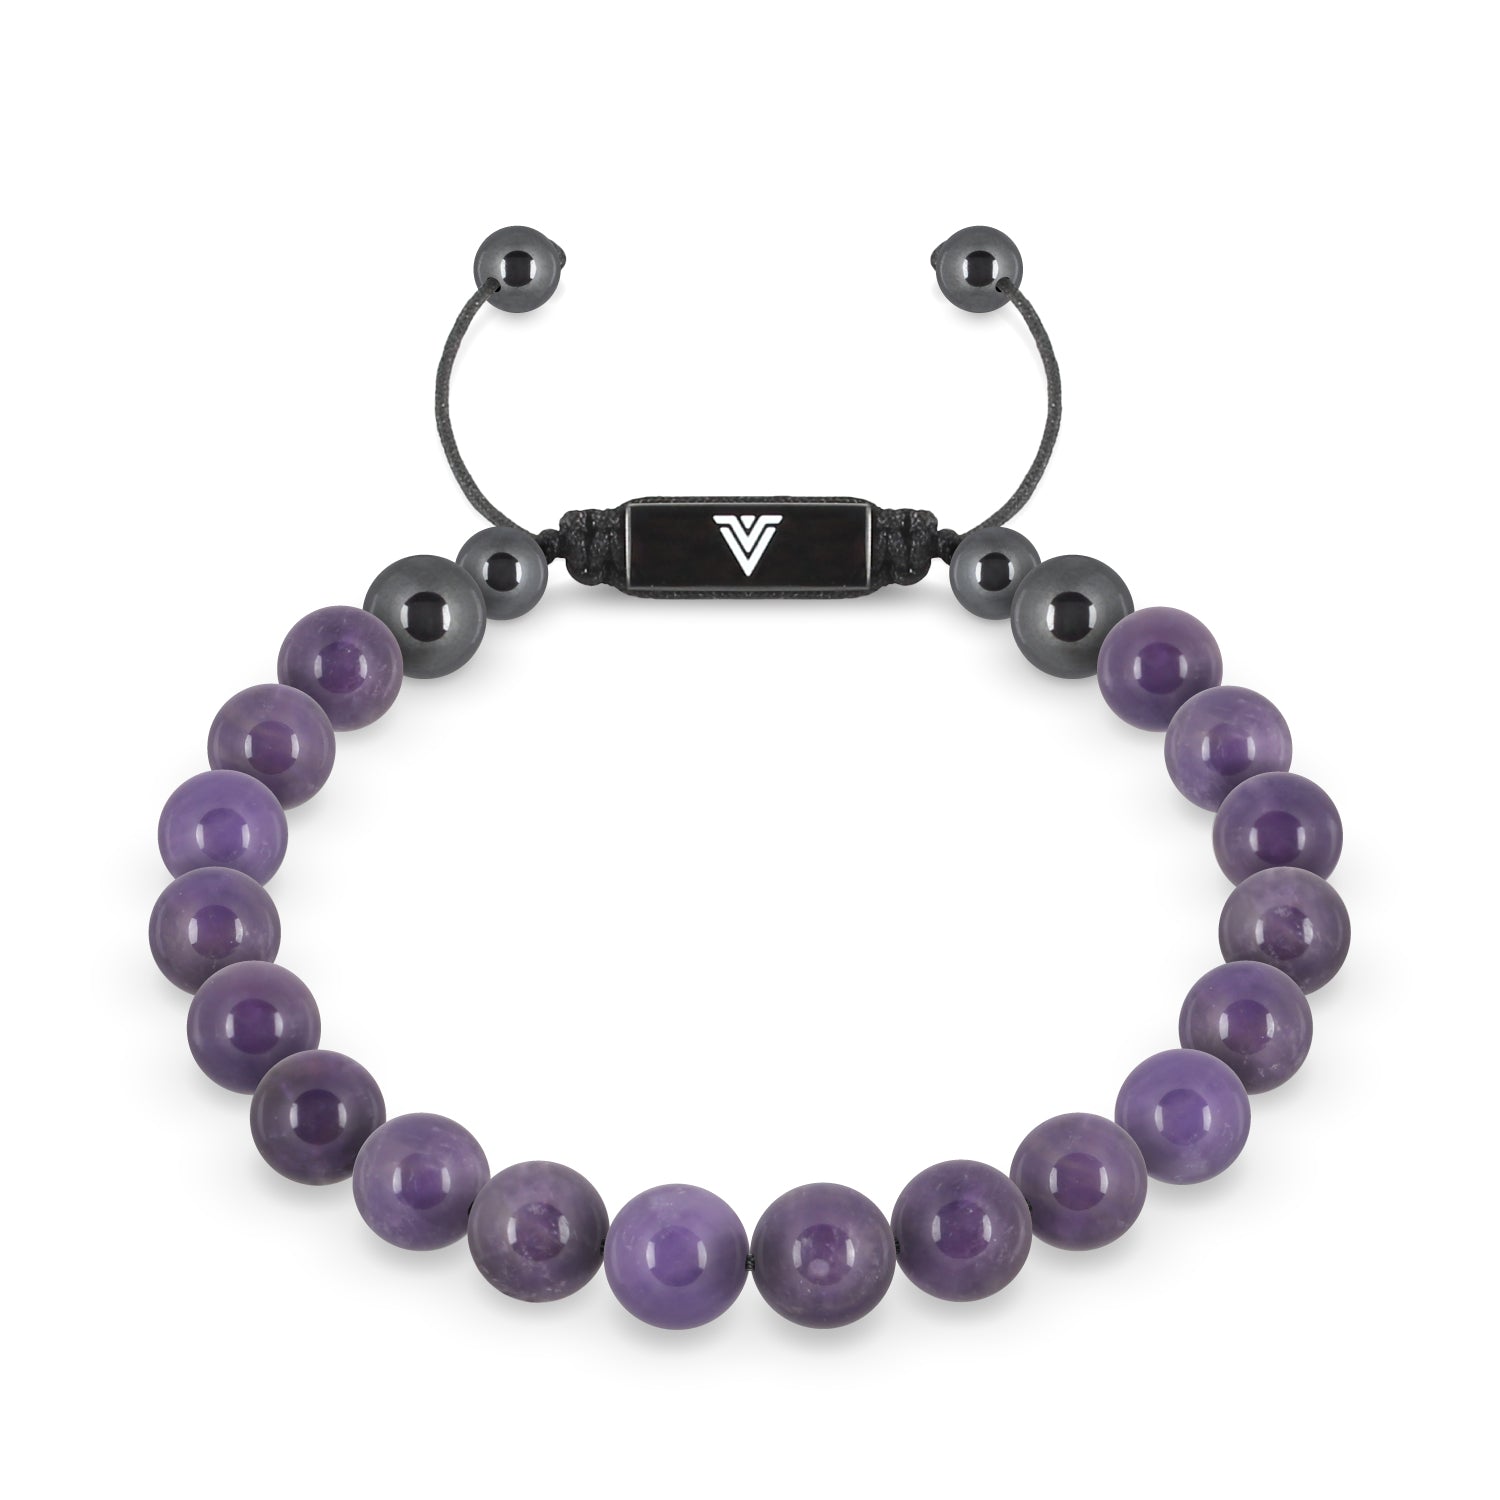 Front view of an 8mm Amethyst crystal beaded shamballa bracelet with black stainless steel logo bead made by Voltlin